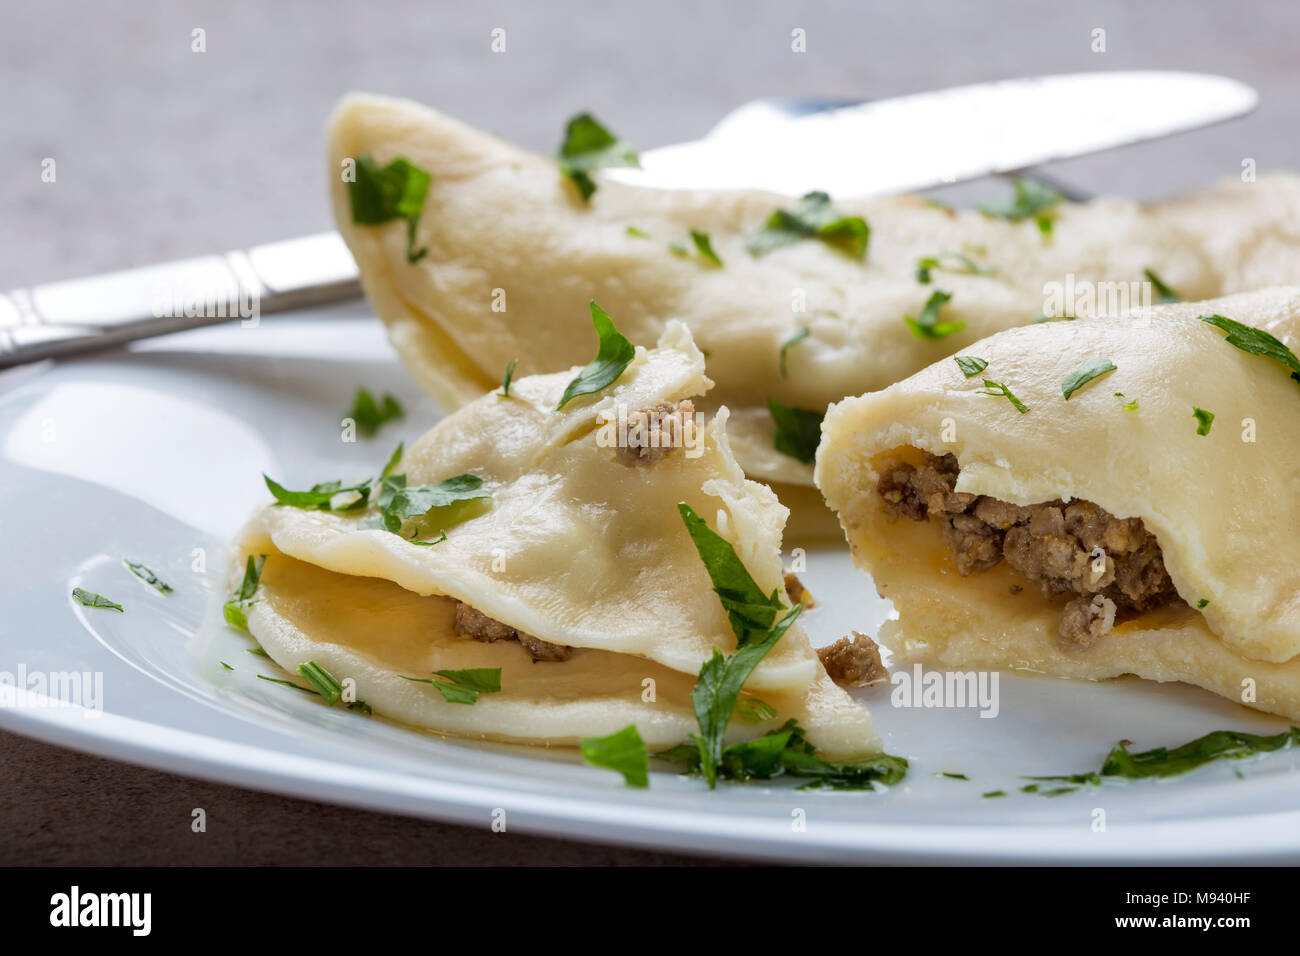 Pierogi, pyrohy or dumplings, filled with beef meat and covered with parsley on plate with knife Stock Photo